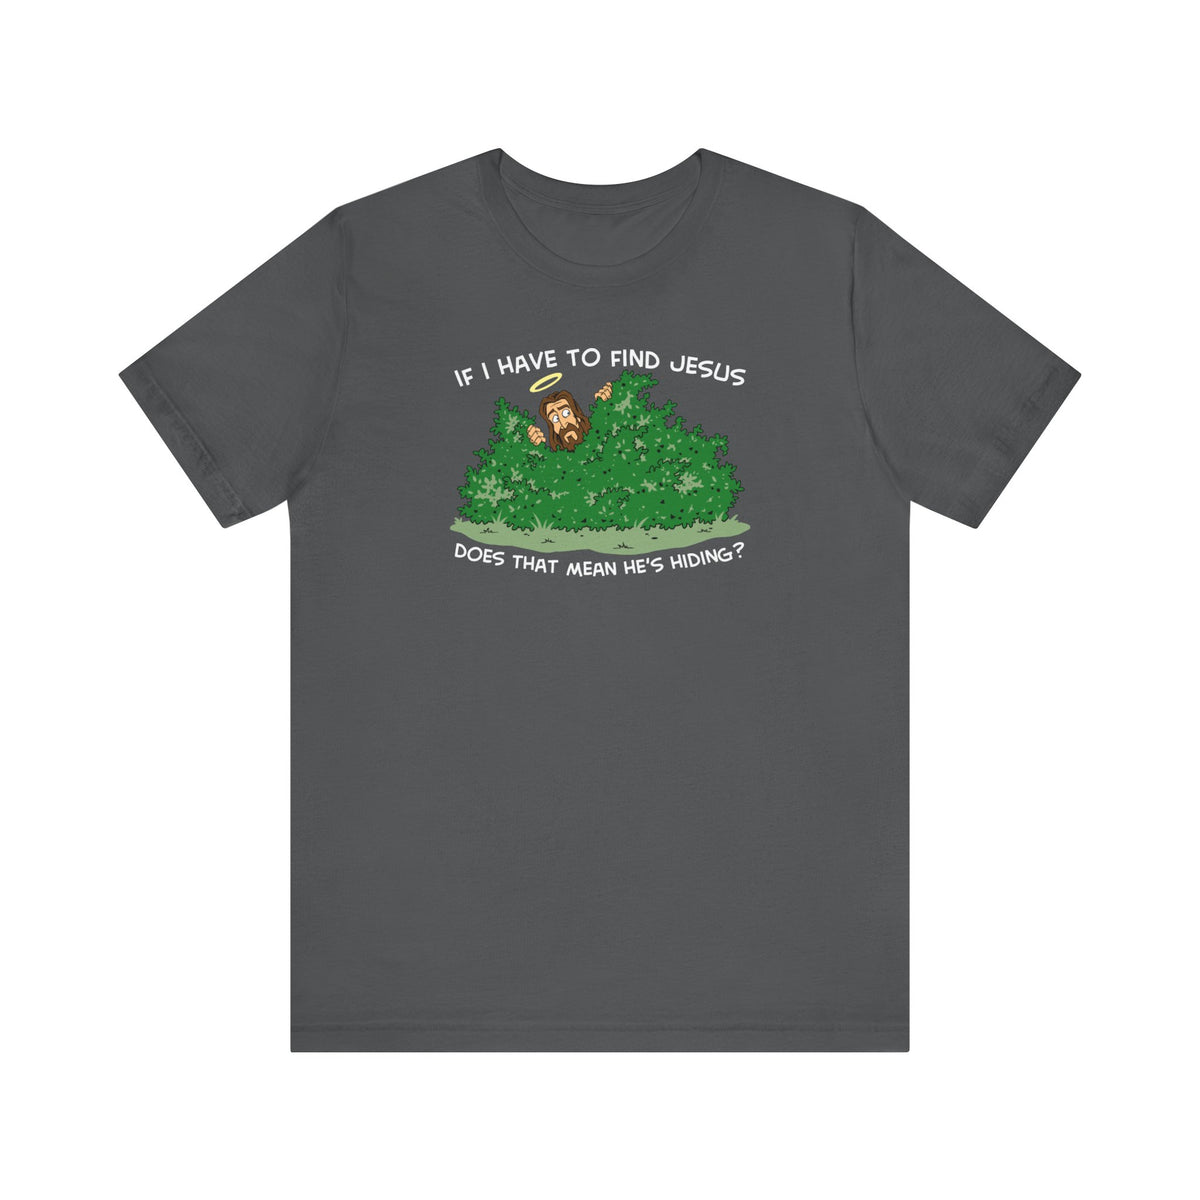 If I Have To Find Jesus Does That Mean He's Hiding? - Men's T-Shirt